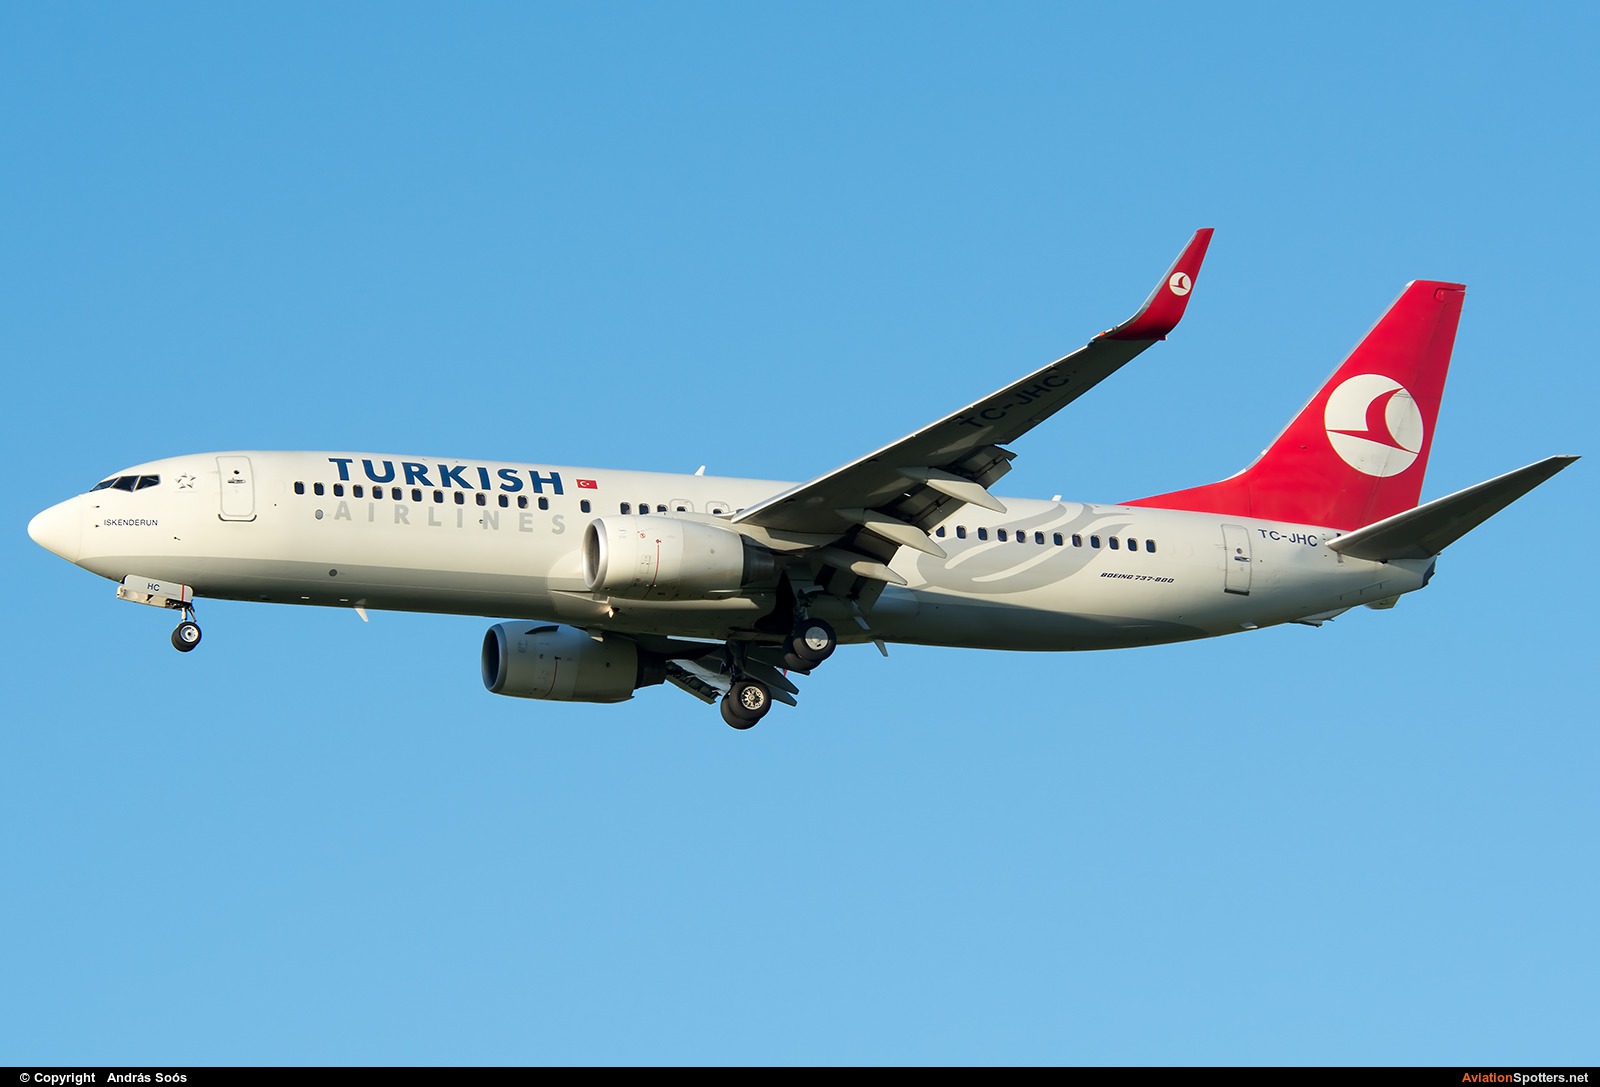 Turkish Airlines  -  737-800  (TC-JHC) By András Soós (sas1965)